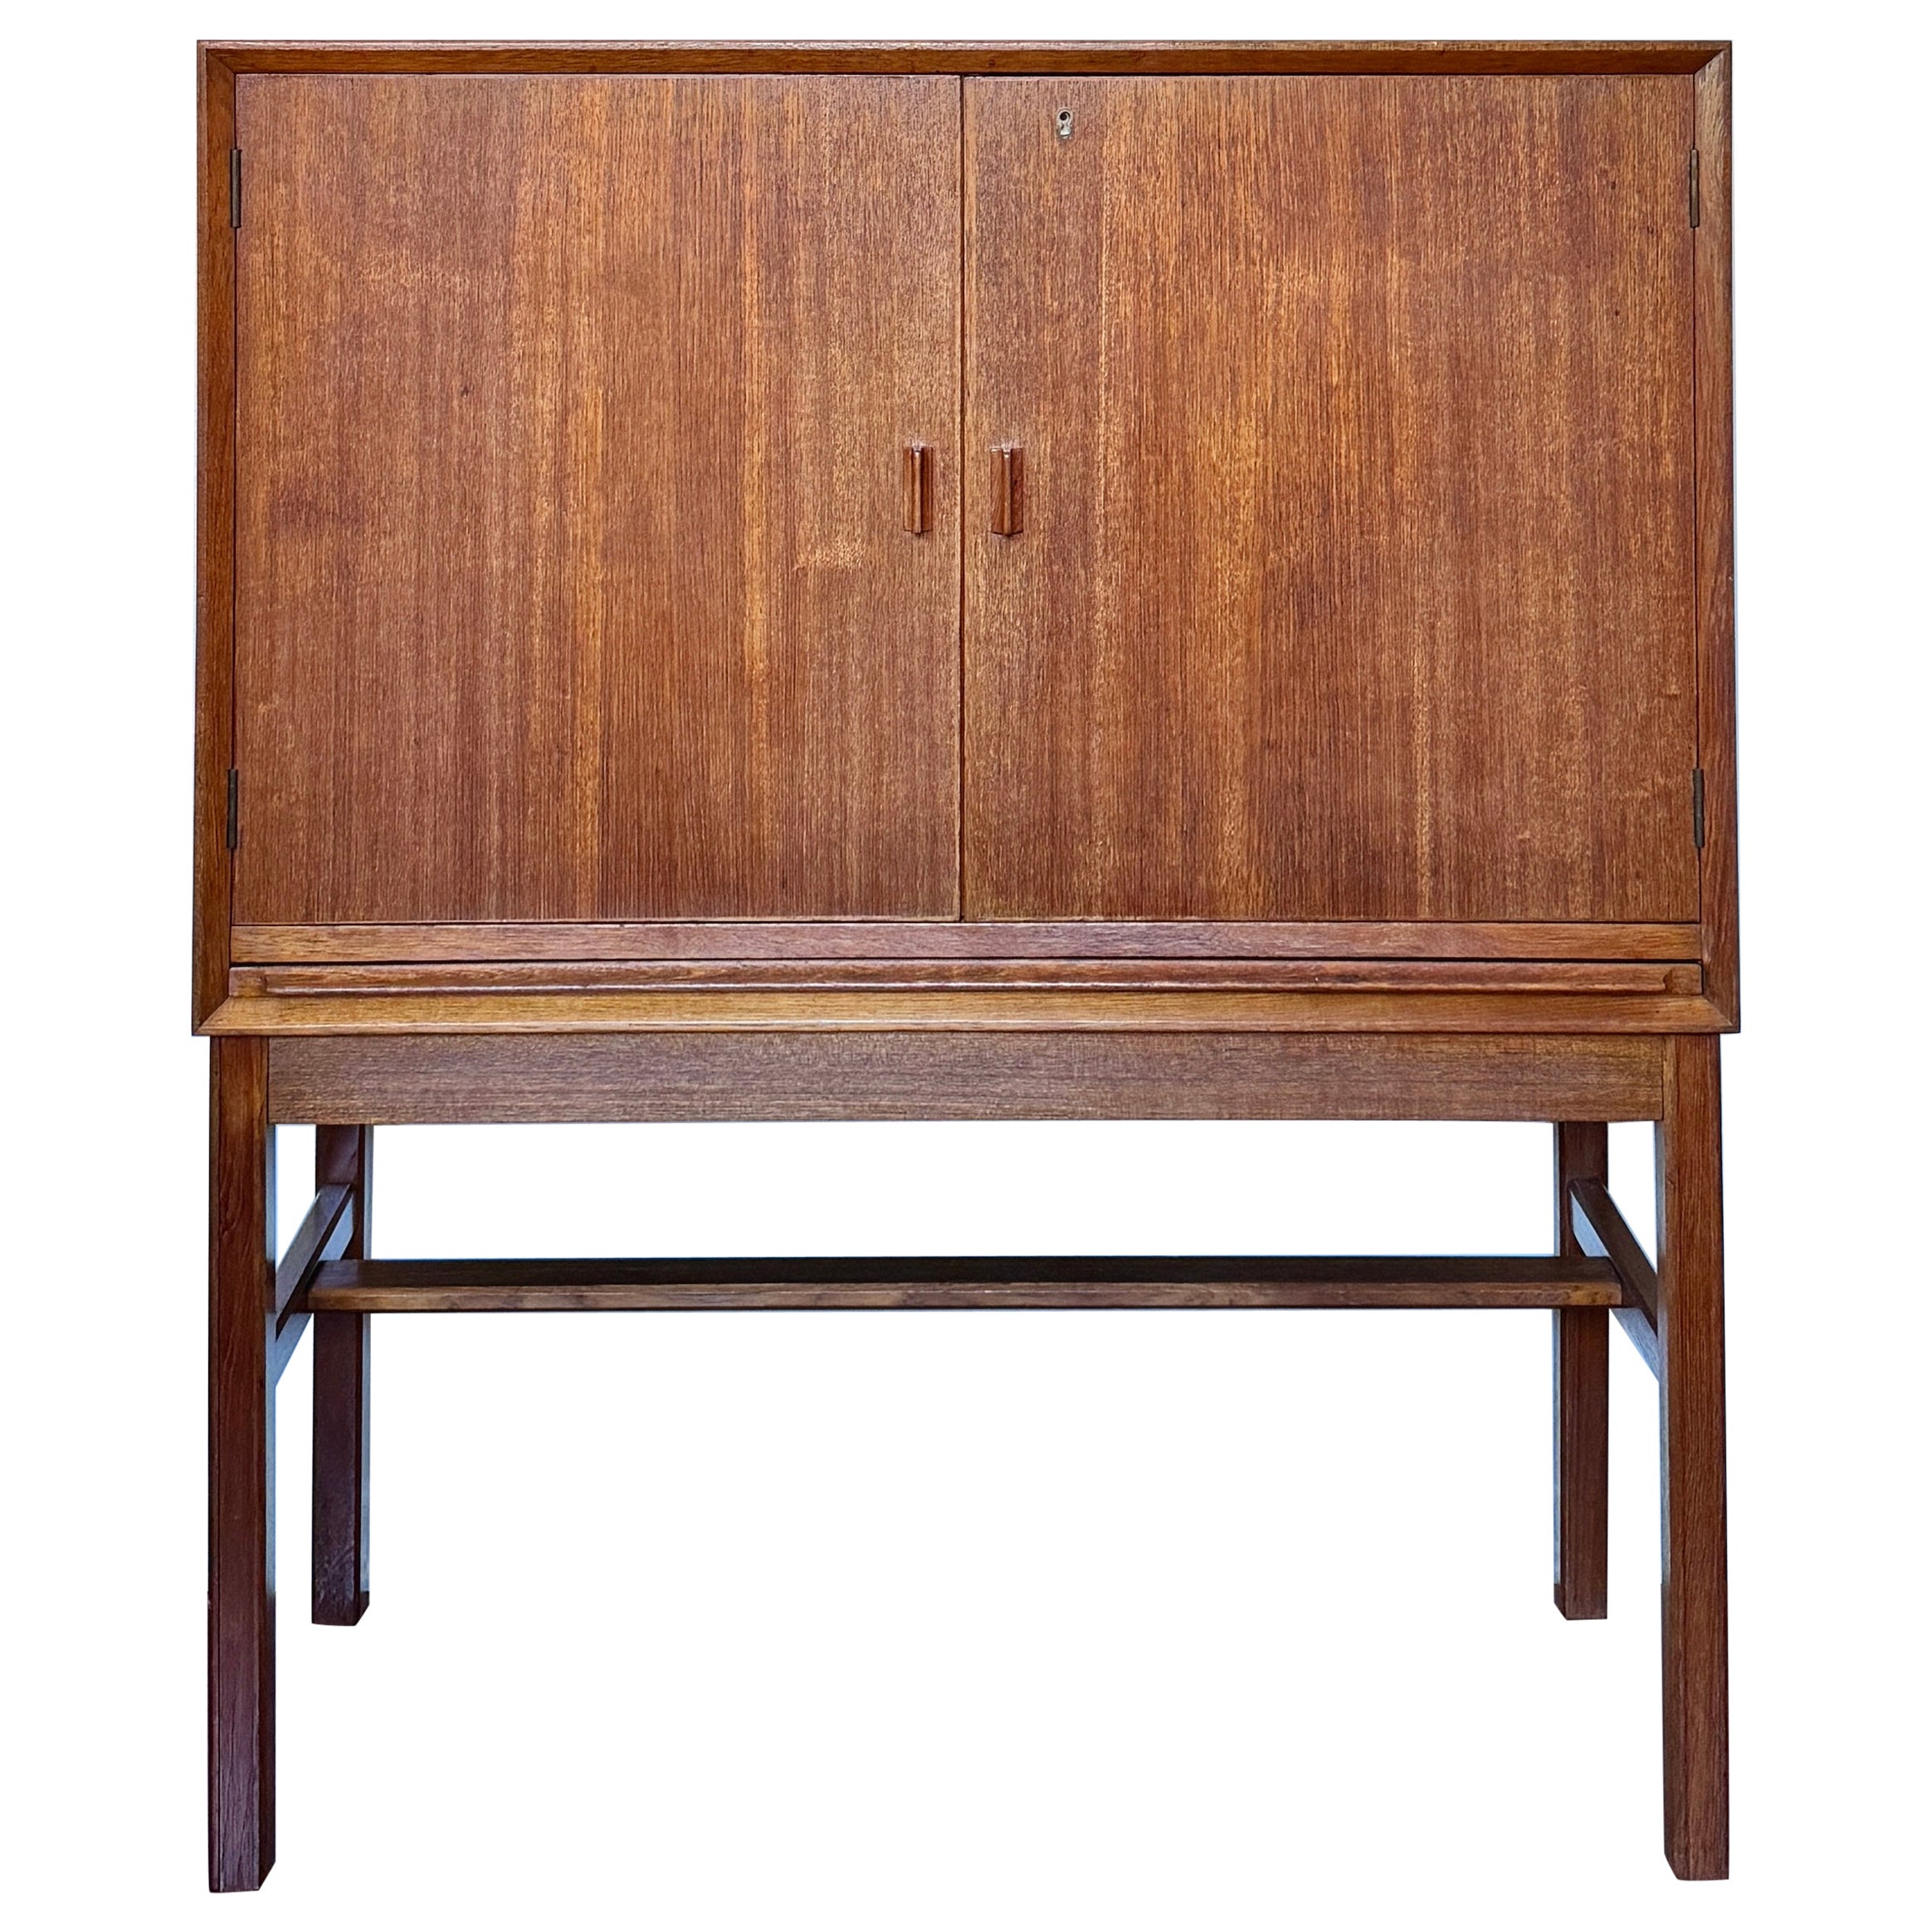 A rare mid century modern tall bar cabinet with a pull out surface For Sale